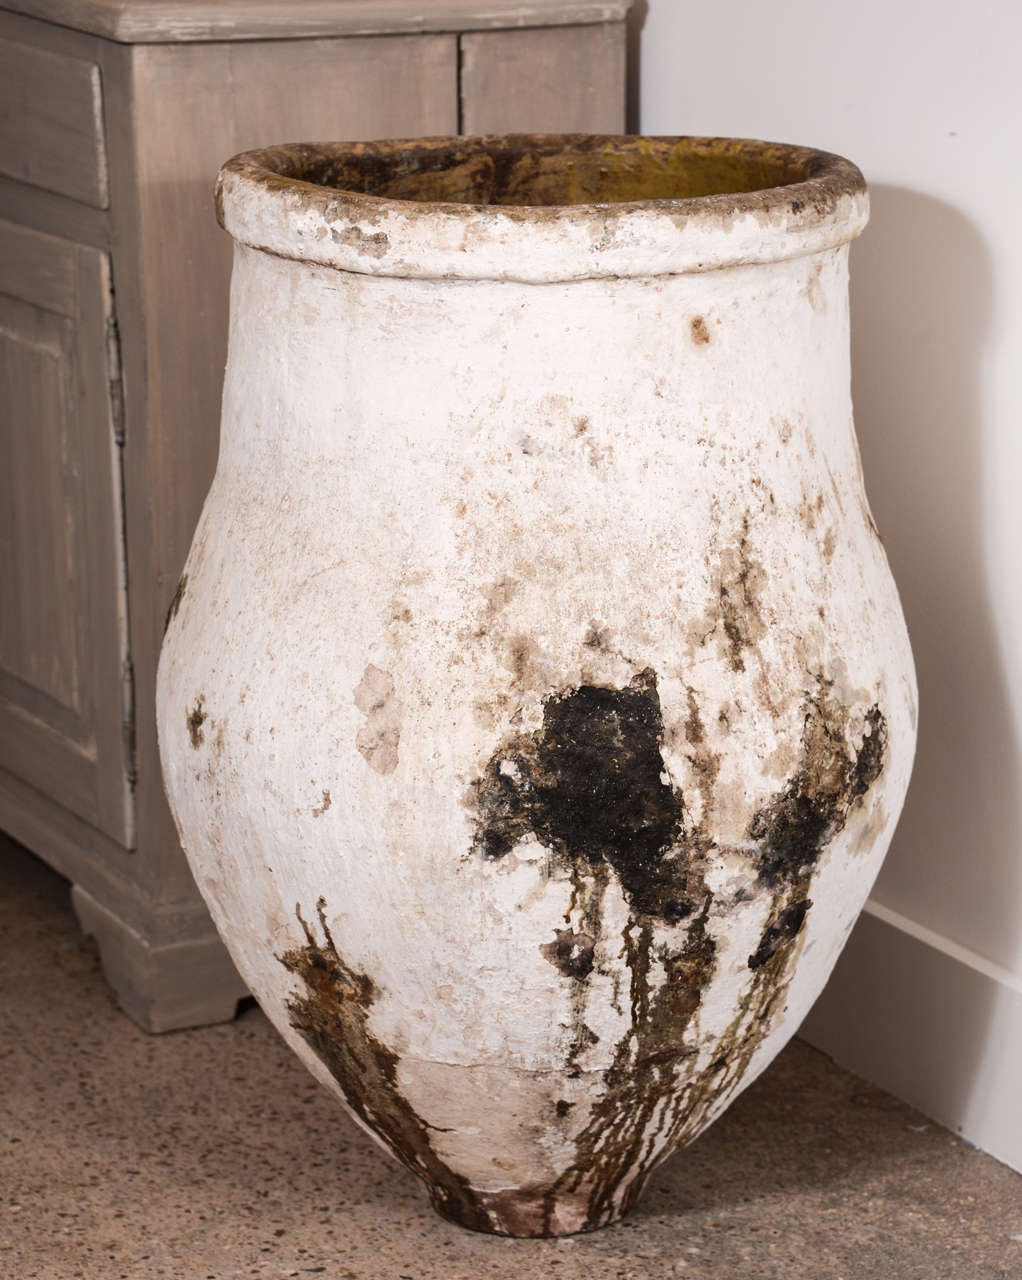 Large 19th century tapered-shape terracotta olive jar (pithari) with a beautiful white patina and remnants of yellow glaze along the rim and inside the jar.